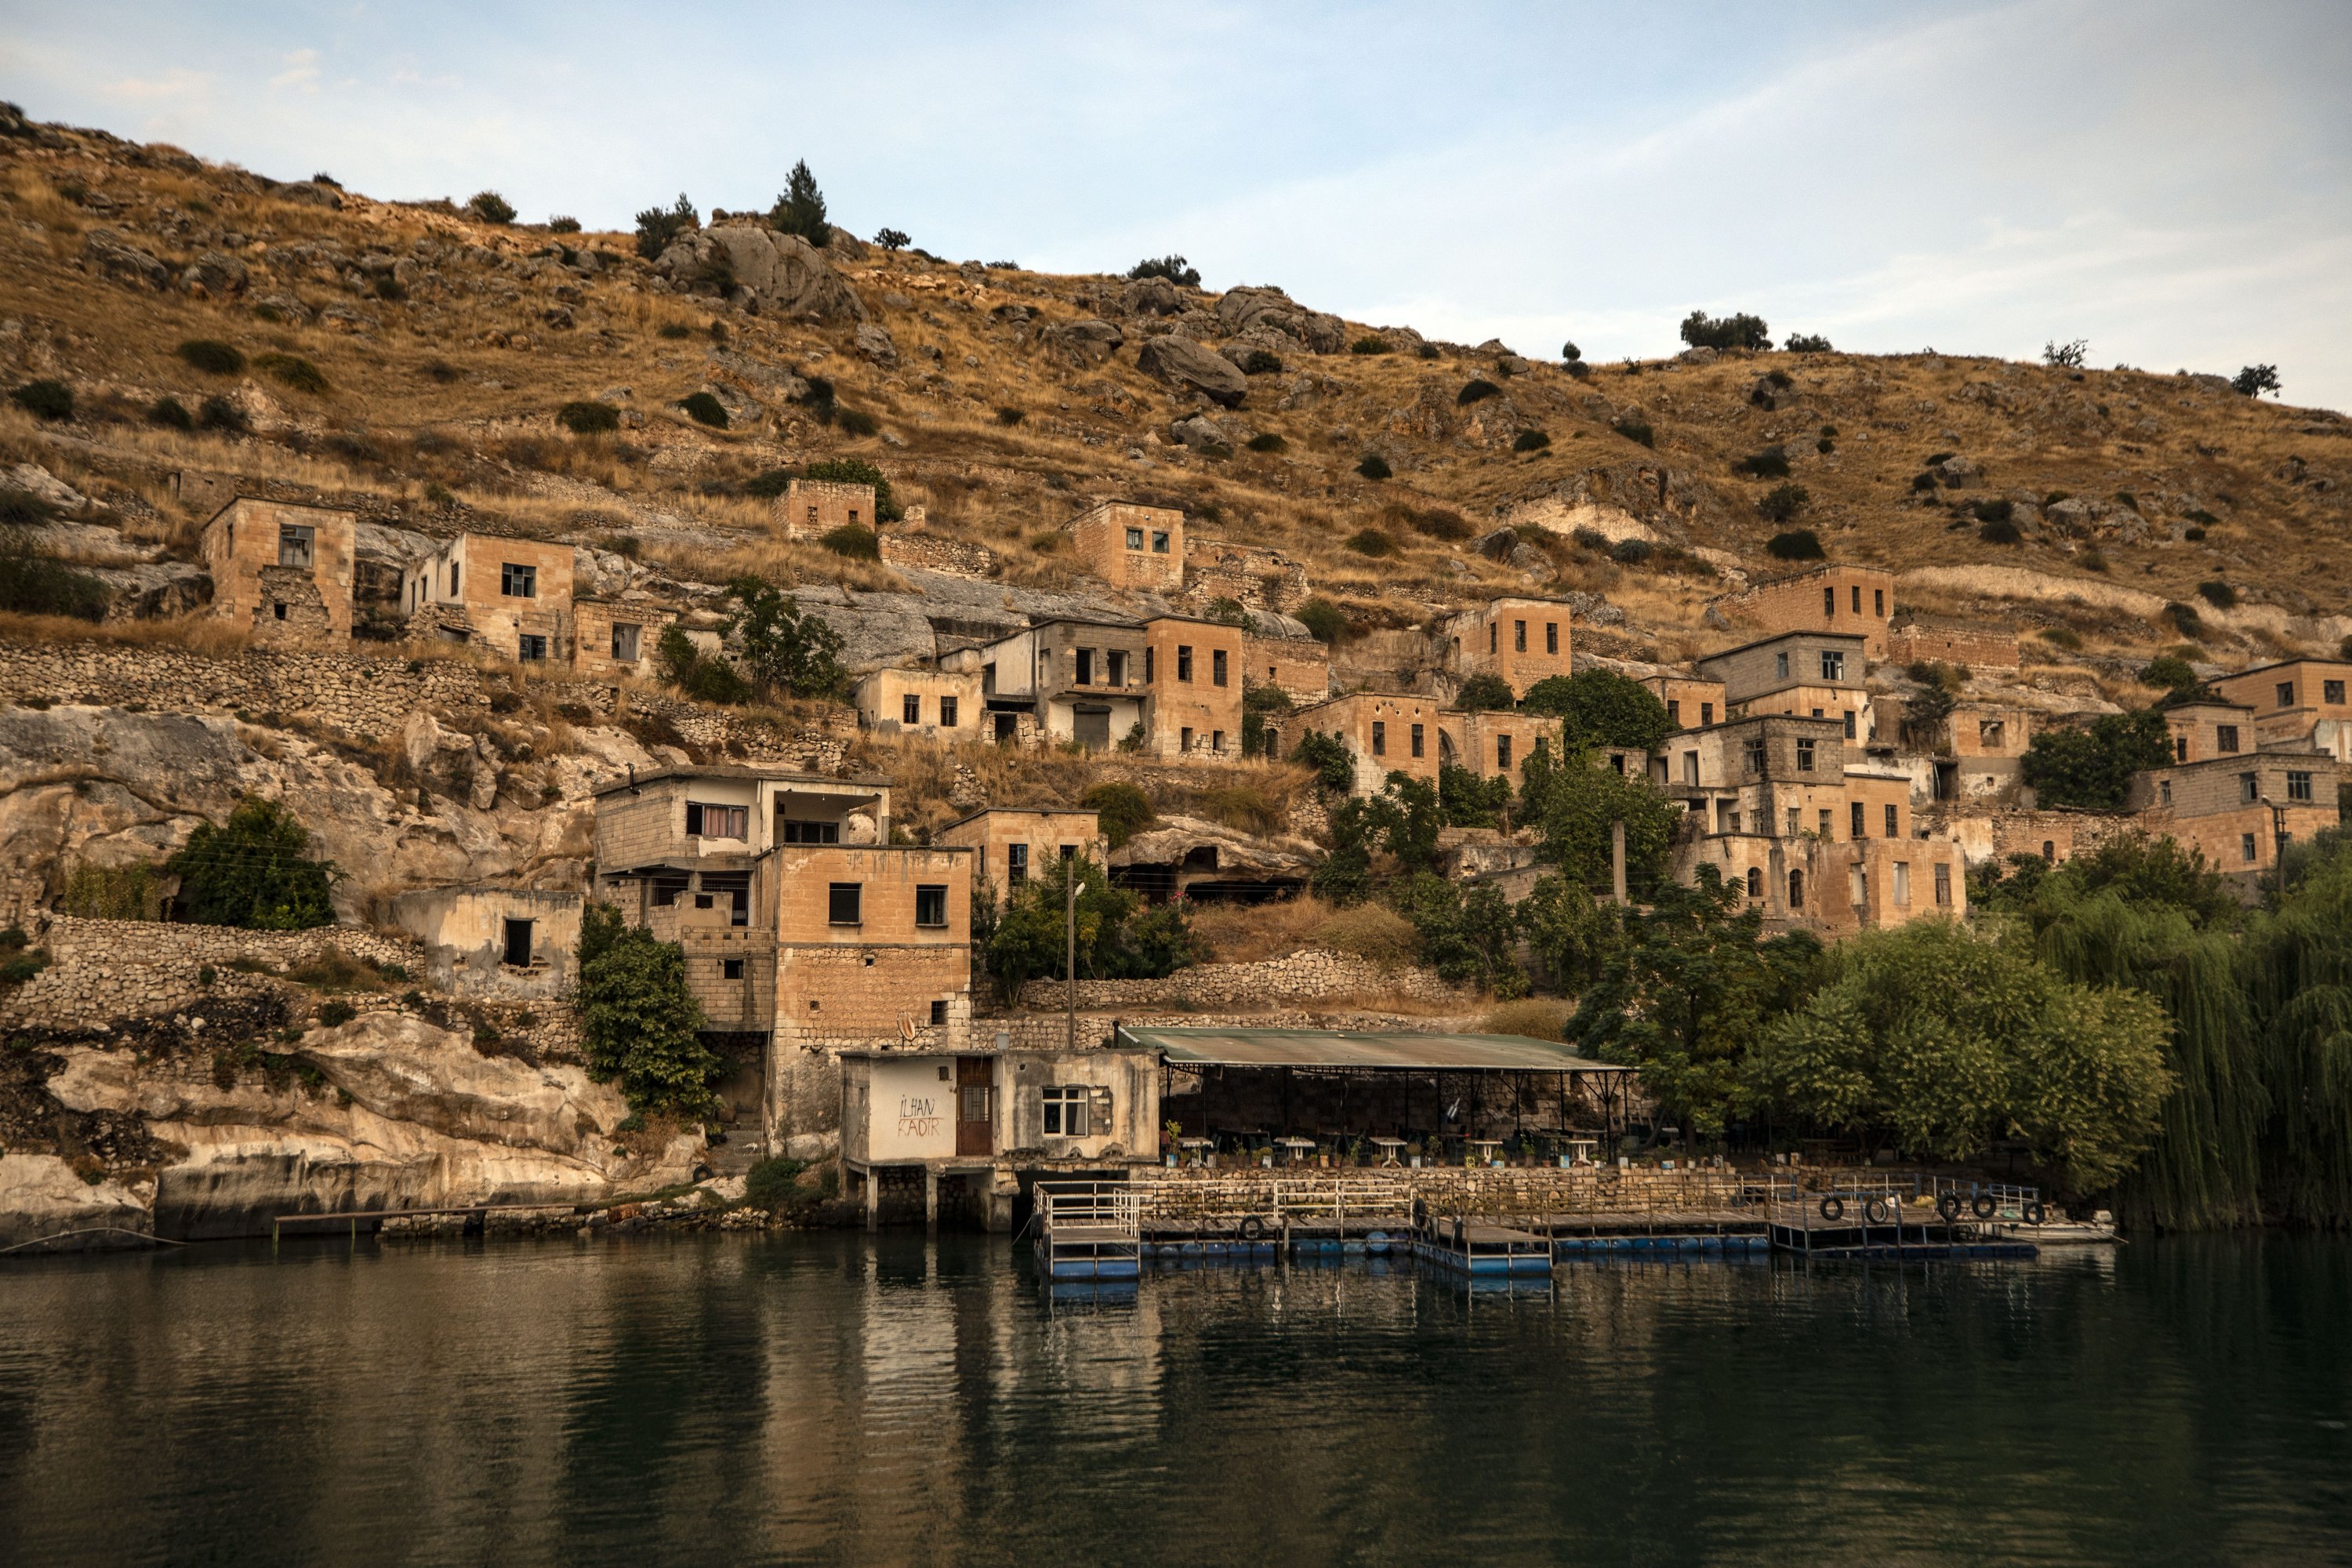 The historic town of Halfeti lies on the eastern bank of the Euphrates River and is aptly called the “sunken city” in Turkish because it is partially submerged underwater. (AA Photo)